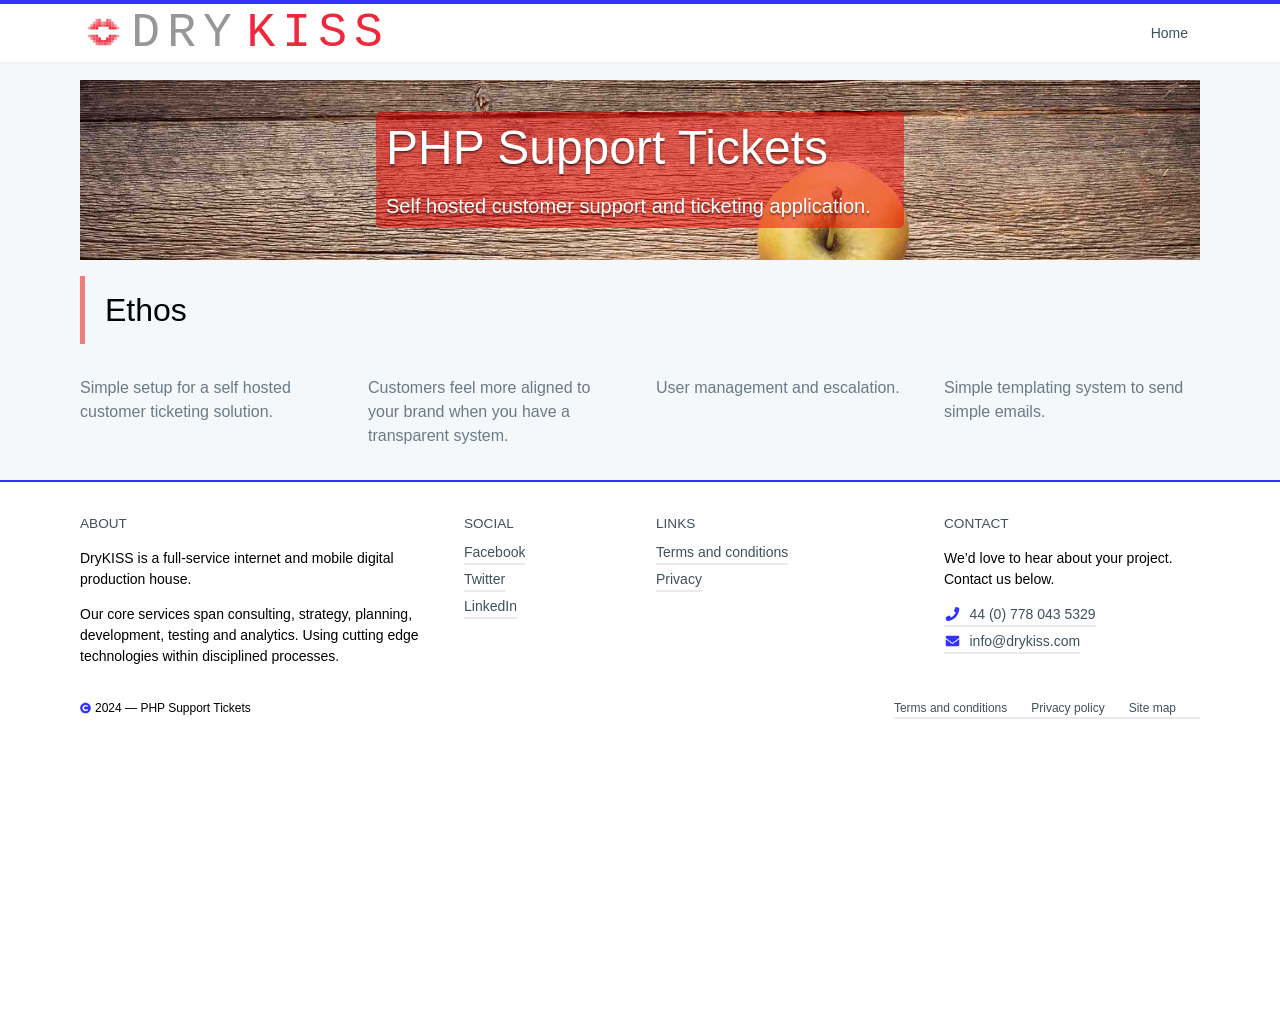 phpsupporttickets.com